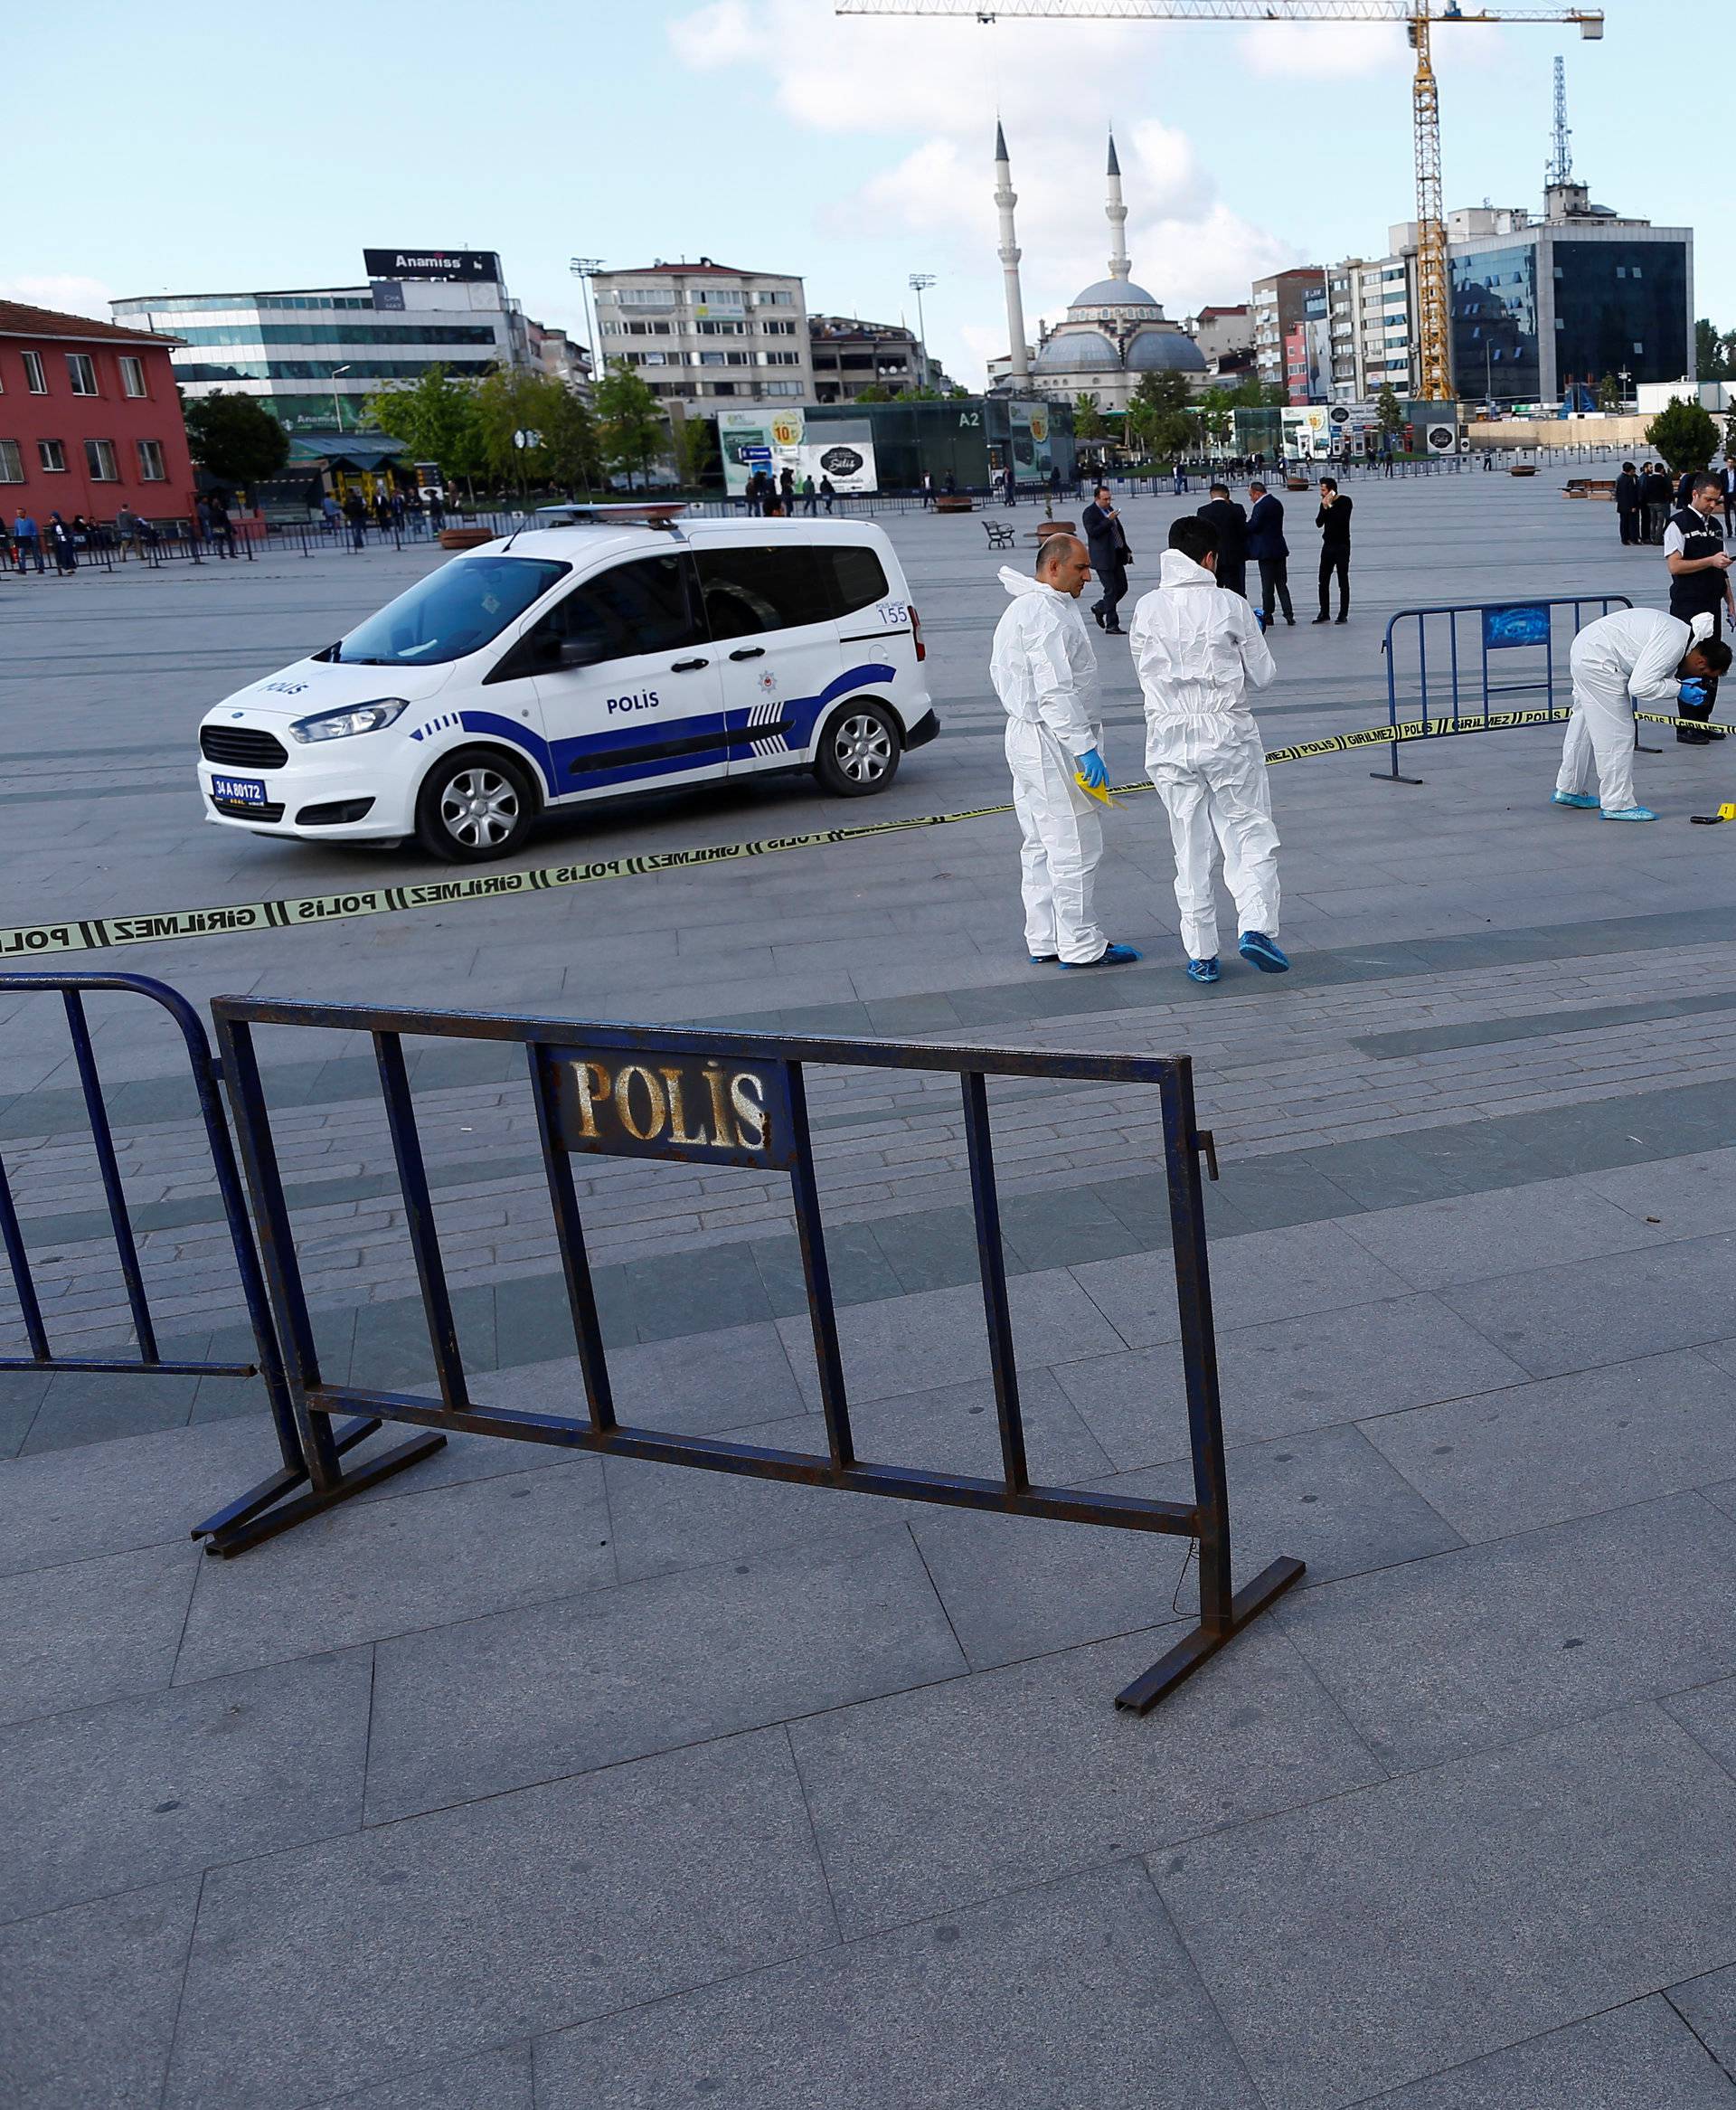 Forensic officers inspect the area after an attack aganist Can Dundar, editor-in-chief of Cumhuriyet in front of the Justice Palace in Istanbul